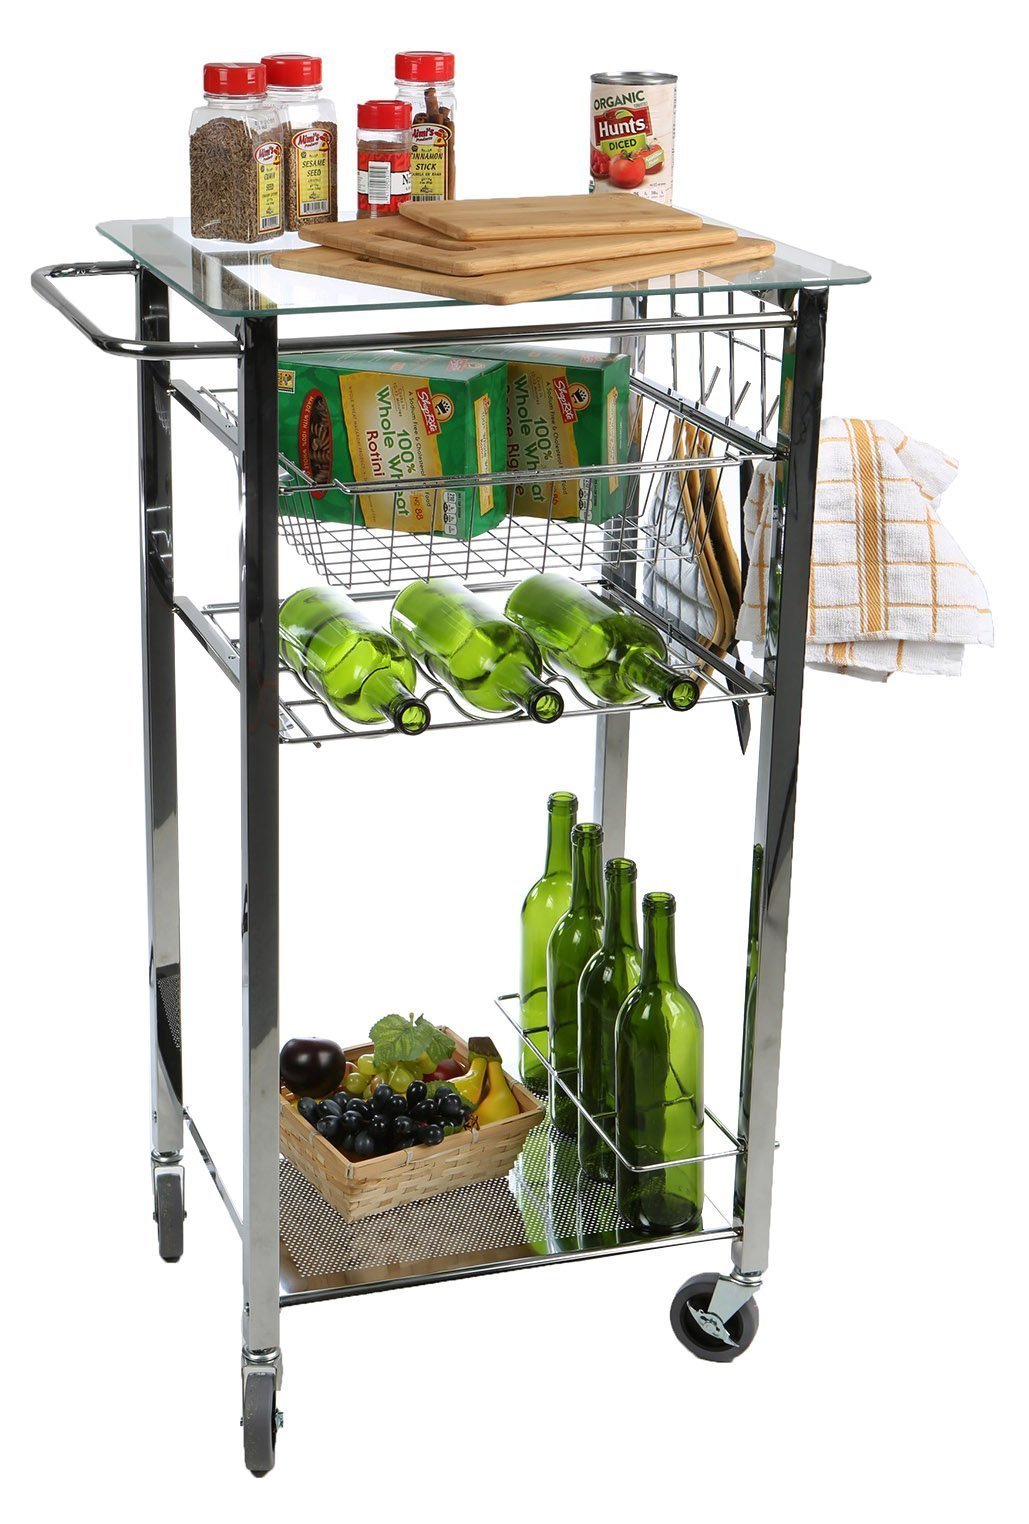 On amazon mind reader glass top mobile kitchen cart with wine bottle holder wine rack towel holder perfect kitchen island for cooking utensils kitchen appliances and food storage silver